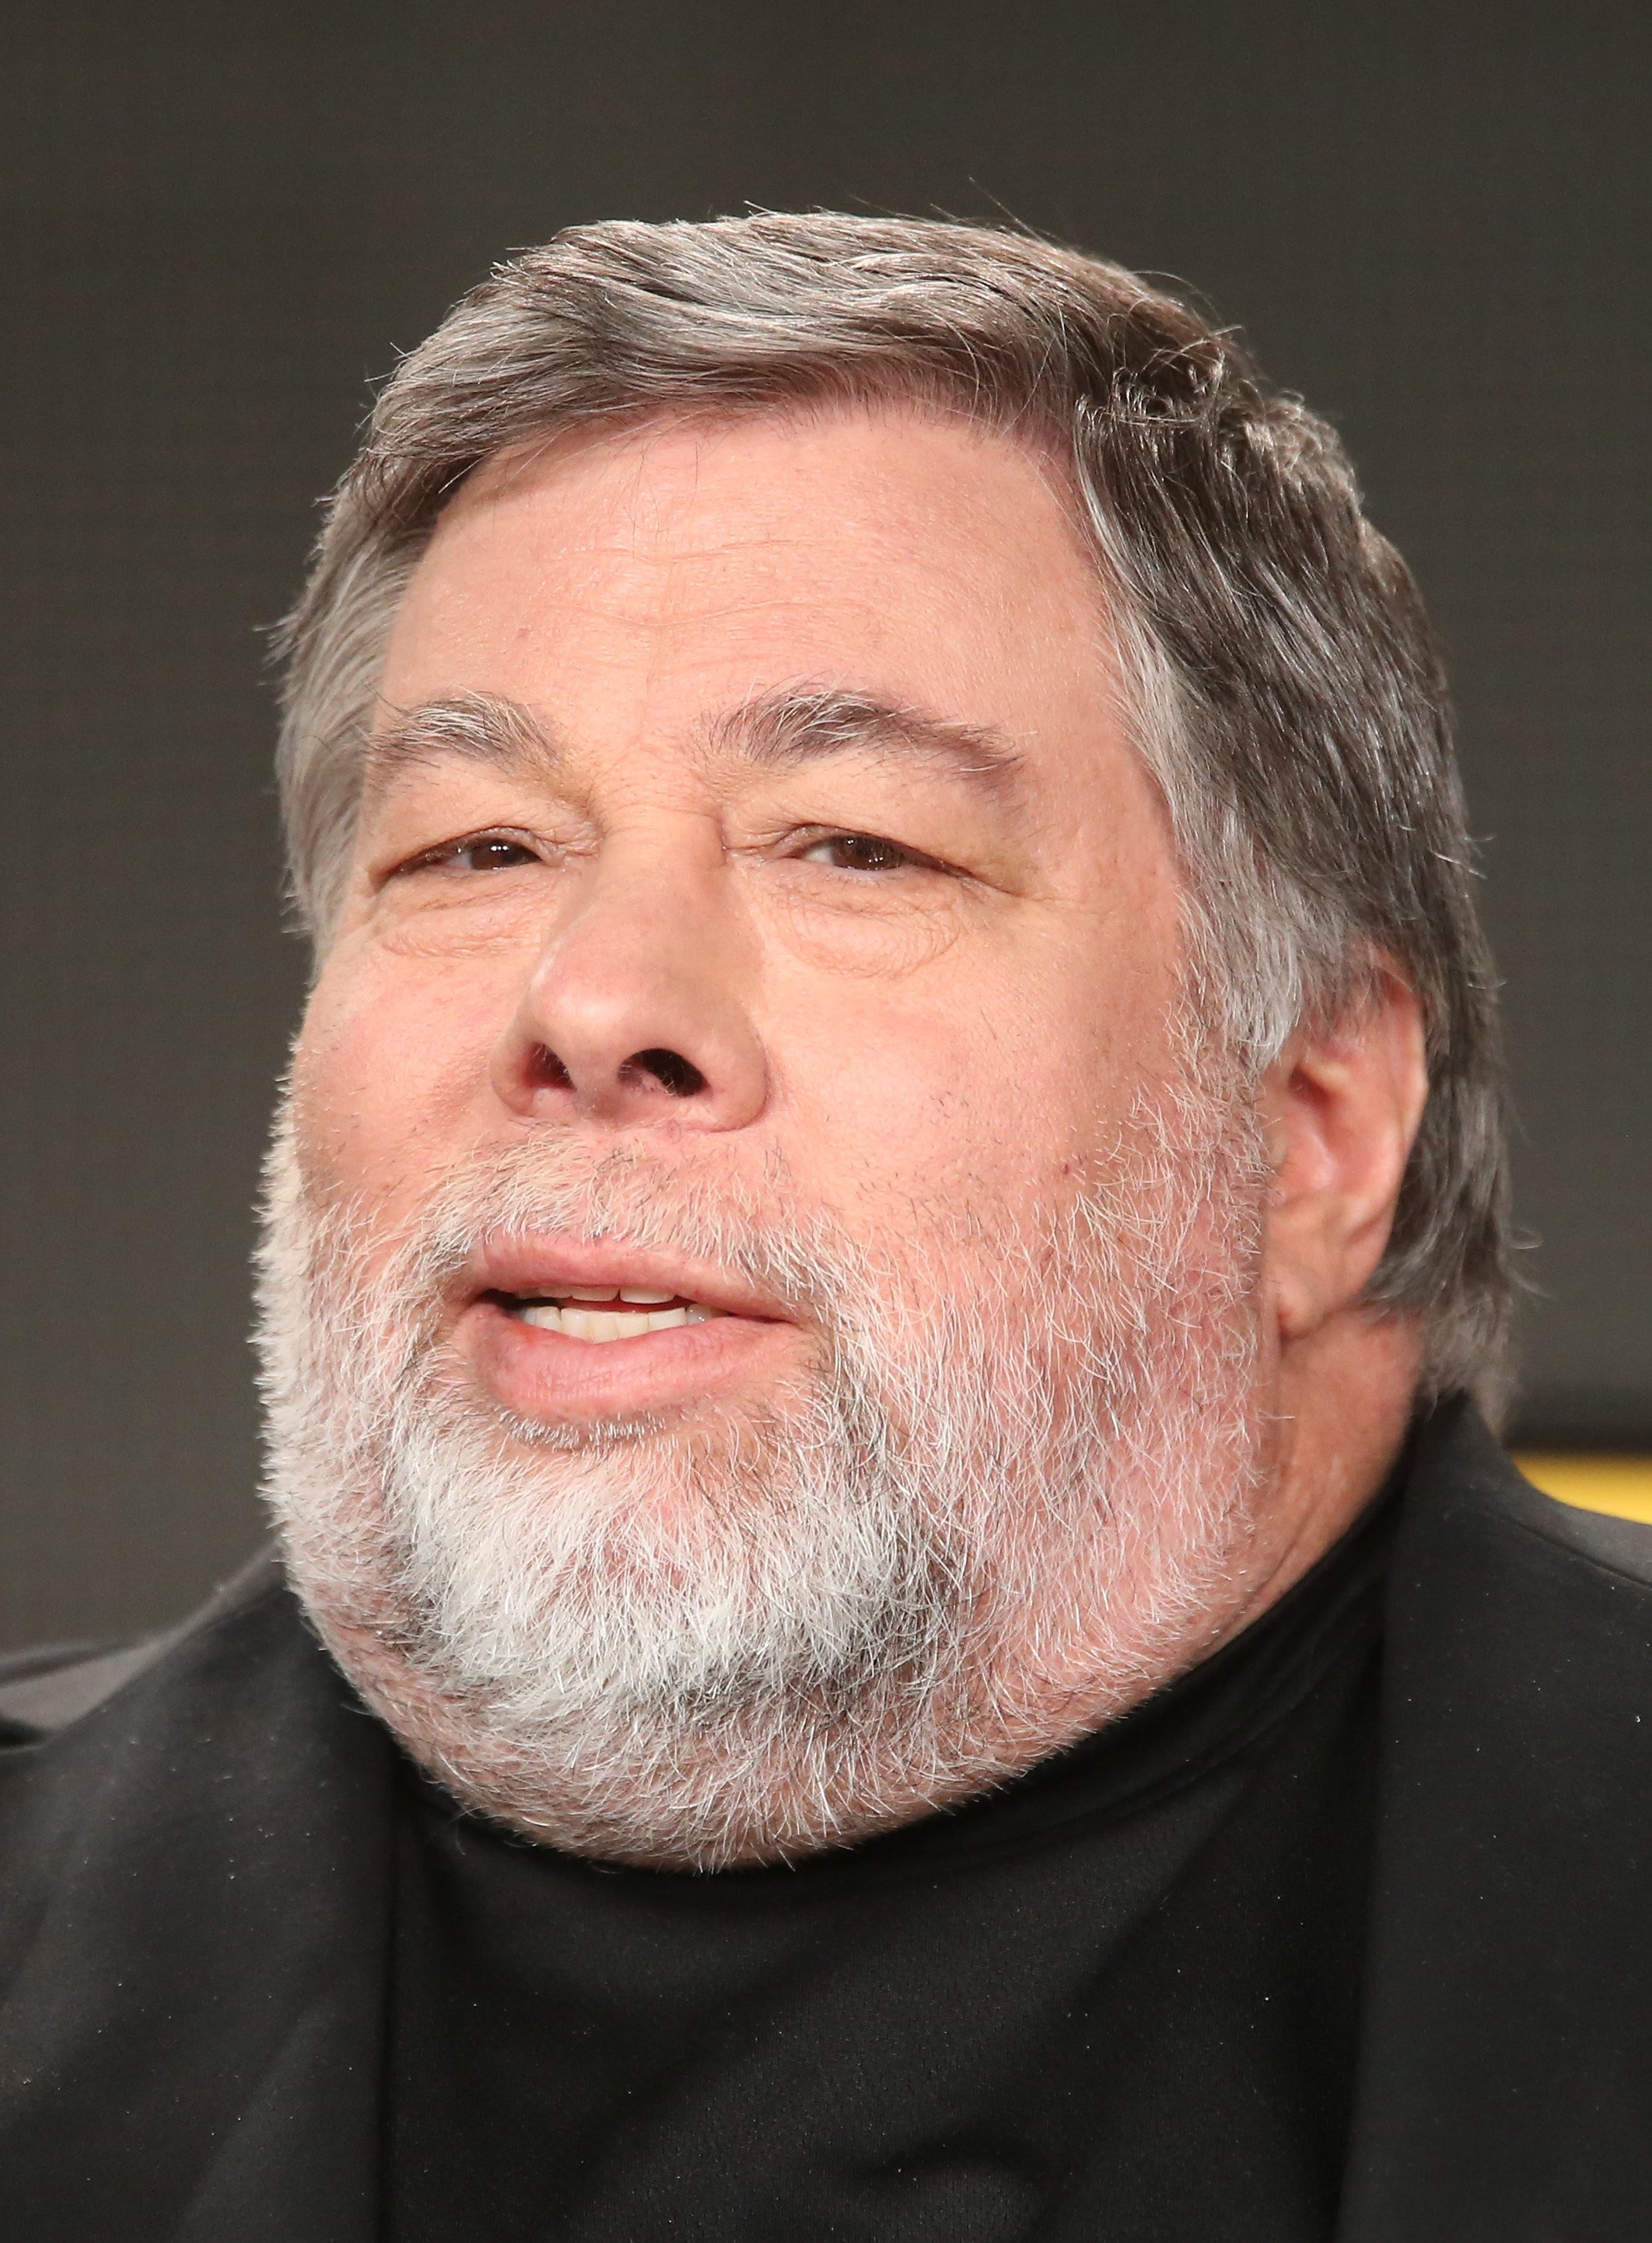 Steve Wozniak, co-founder of Apple, speaks onstage during the National Geographic Channel's 'American Genius' panel at the 2015 Winter Television Critics Association press tour at the Langham Huntington Hotel &amp; Spa on Jan. 7, 2015 in Pasadena, California.